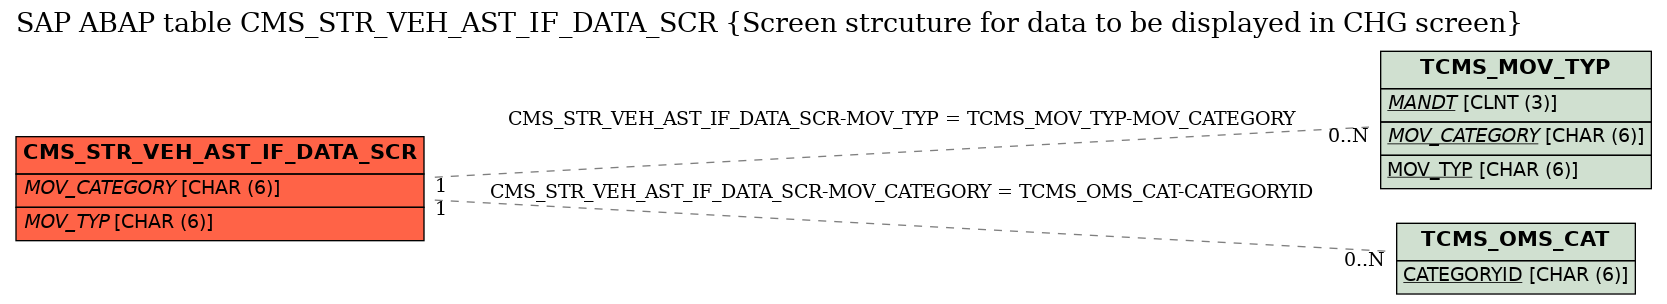 E-R Diagram for table CMS_STR_VEH_AST_IF_DATA_SCR (Screen strcuture for data to be displayed in CHG screen)